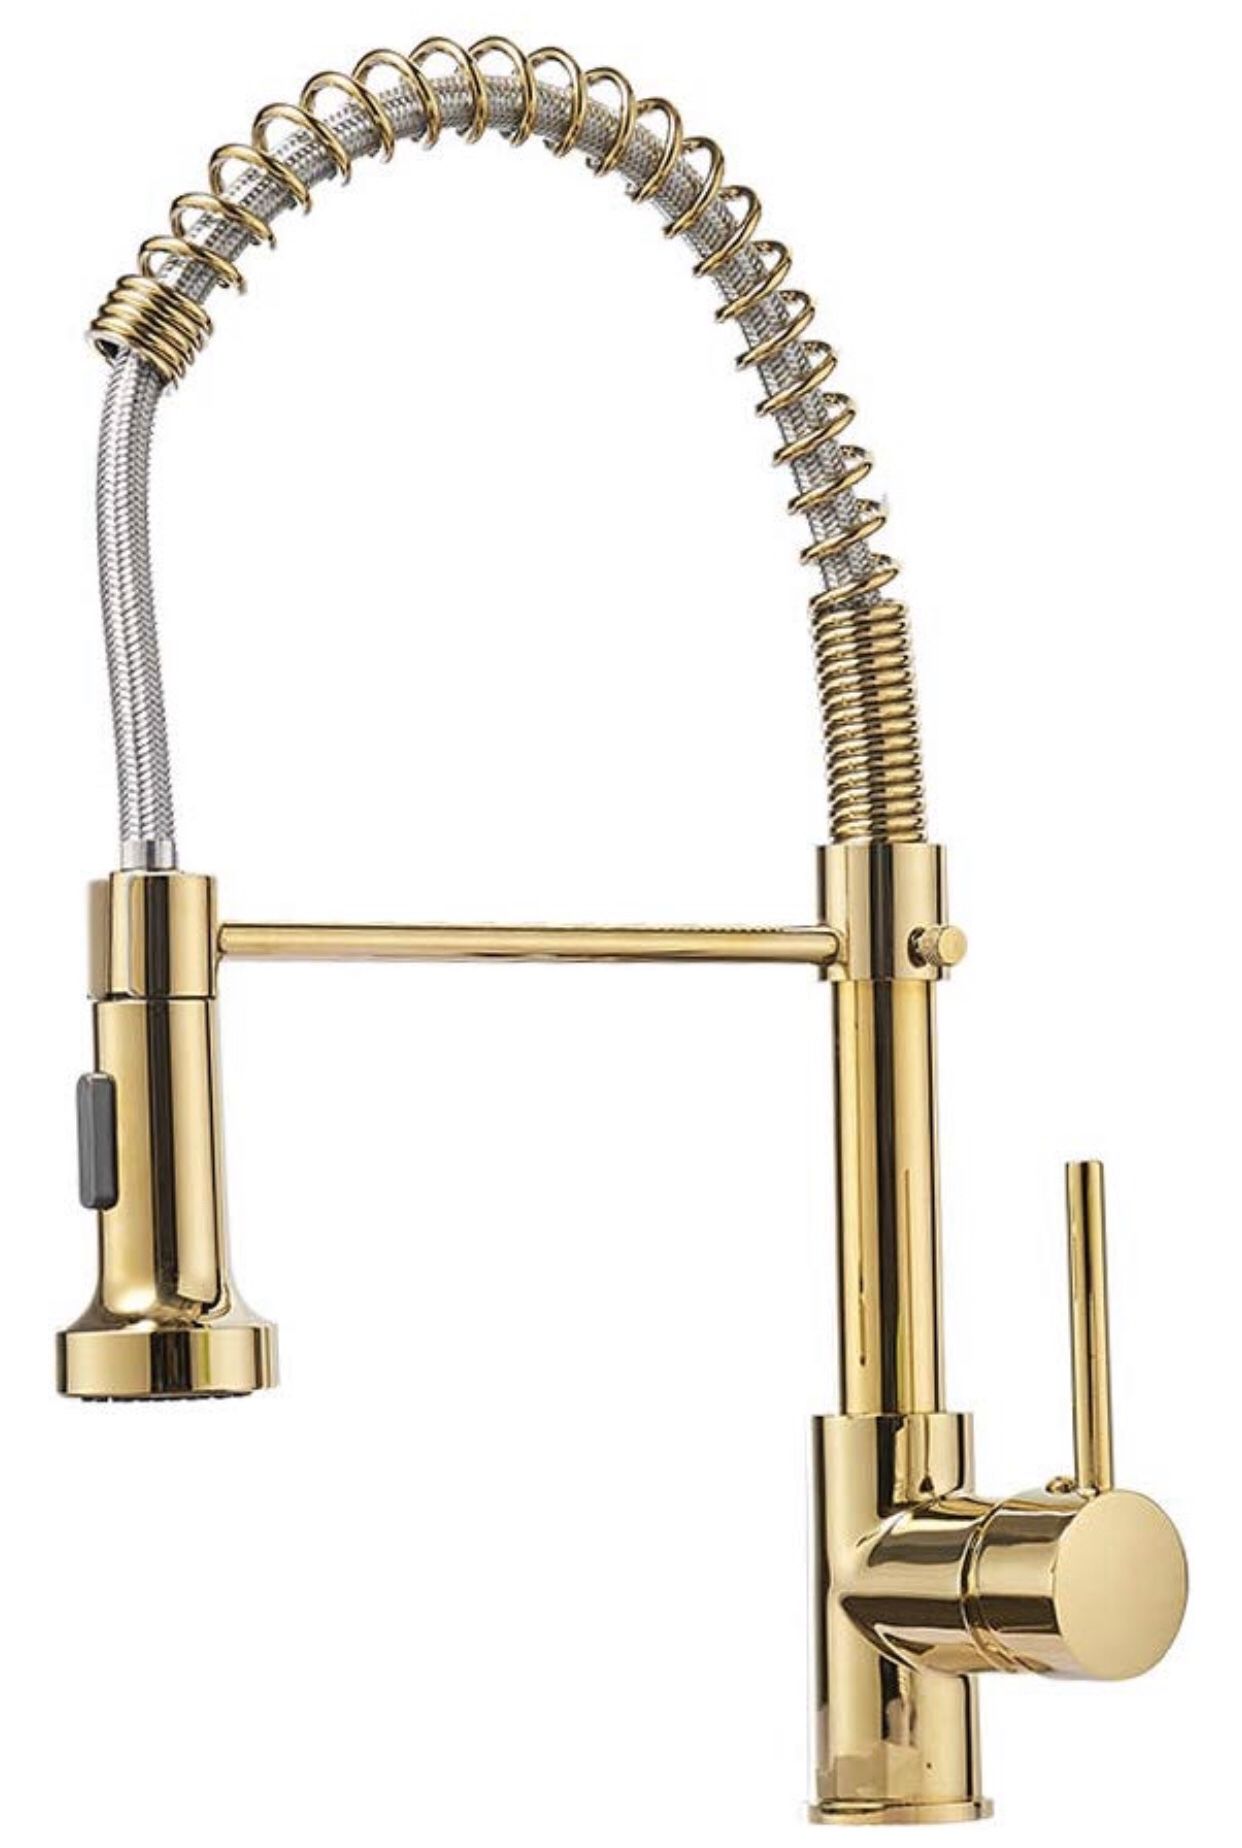 OWOFAN Single Handle 16-Inch Commercial Spring Kitchen Faucet with Dual Function Pull Down Spray Head, Polished Gold Kitchen Sink Faucet 9009K